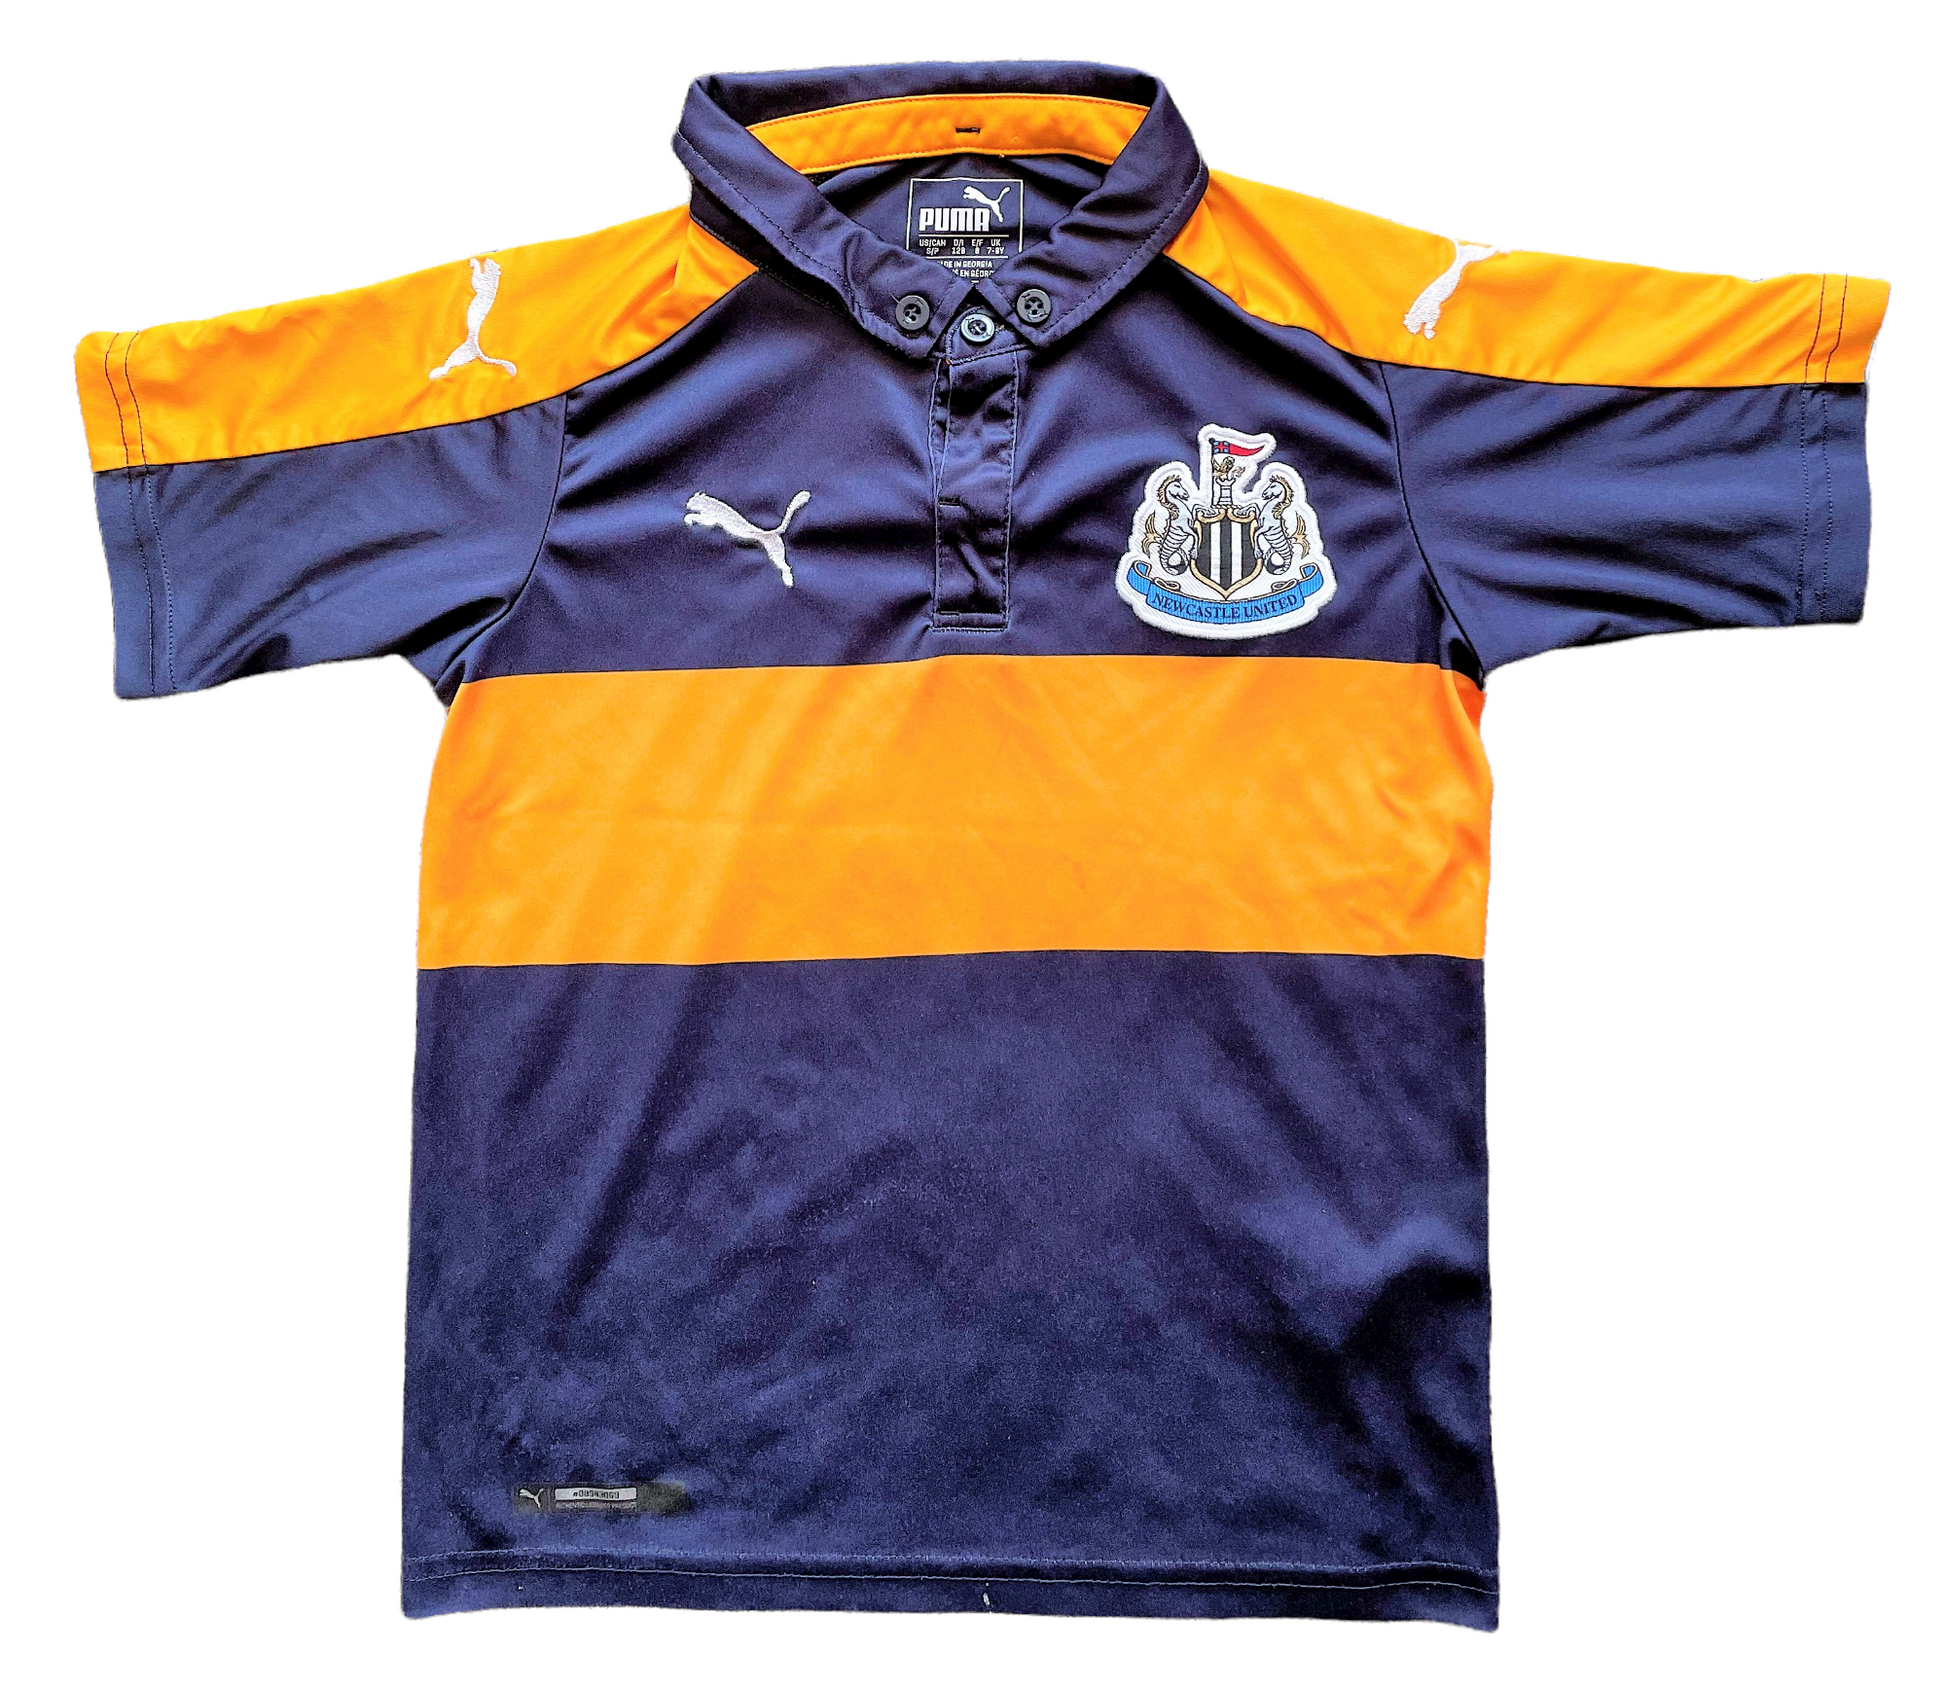 2016-17 Newcastle Away Shirt (good) Childs 7 to 8